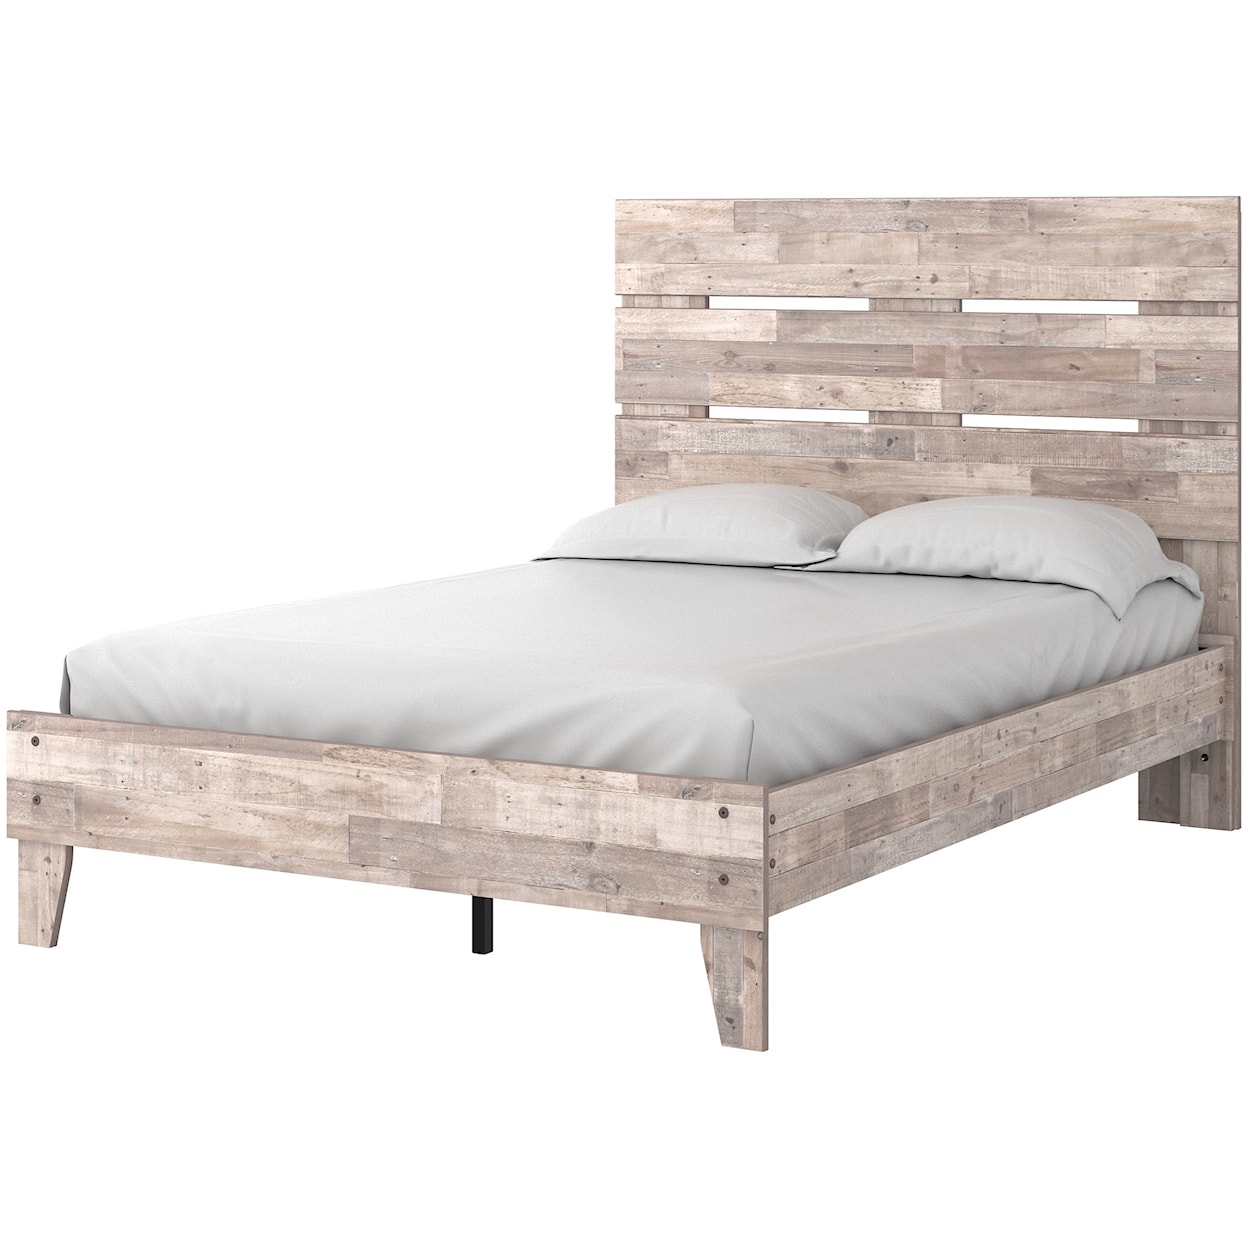 Signature Design by Ashley Furniture Neilsville Full Platform Bed with Headboard